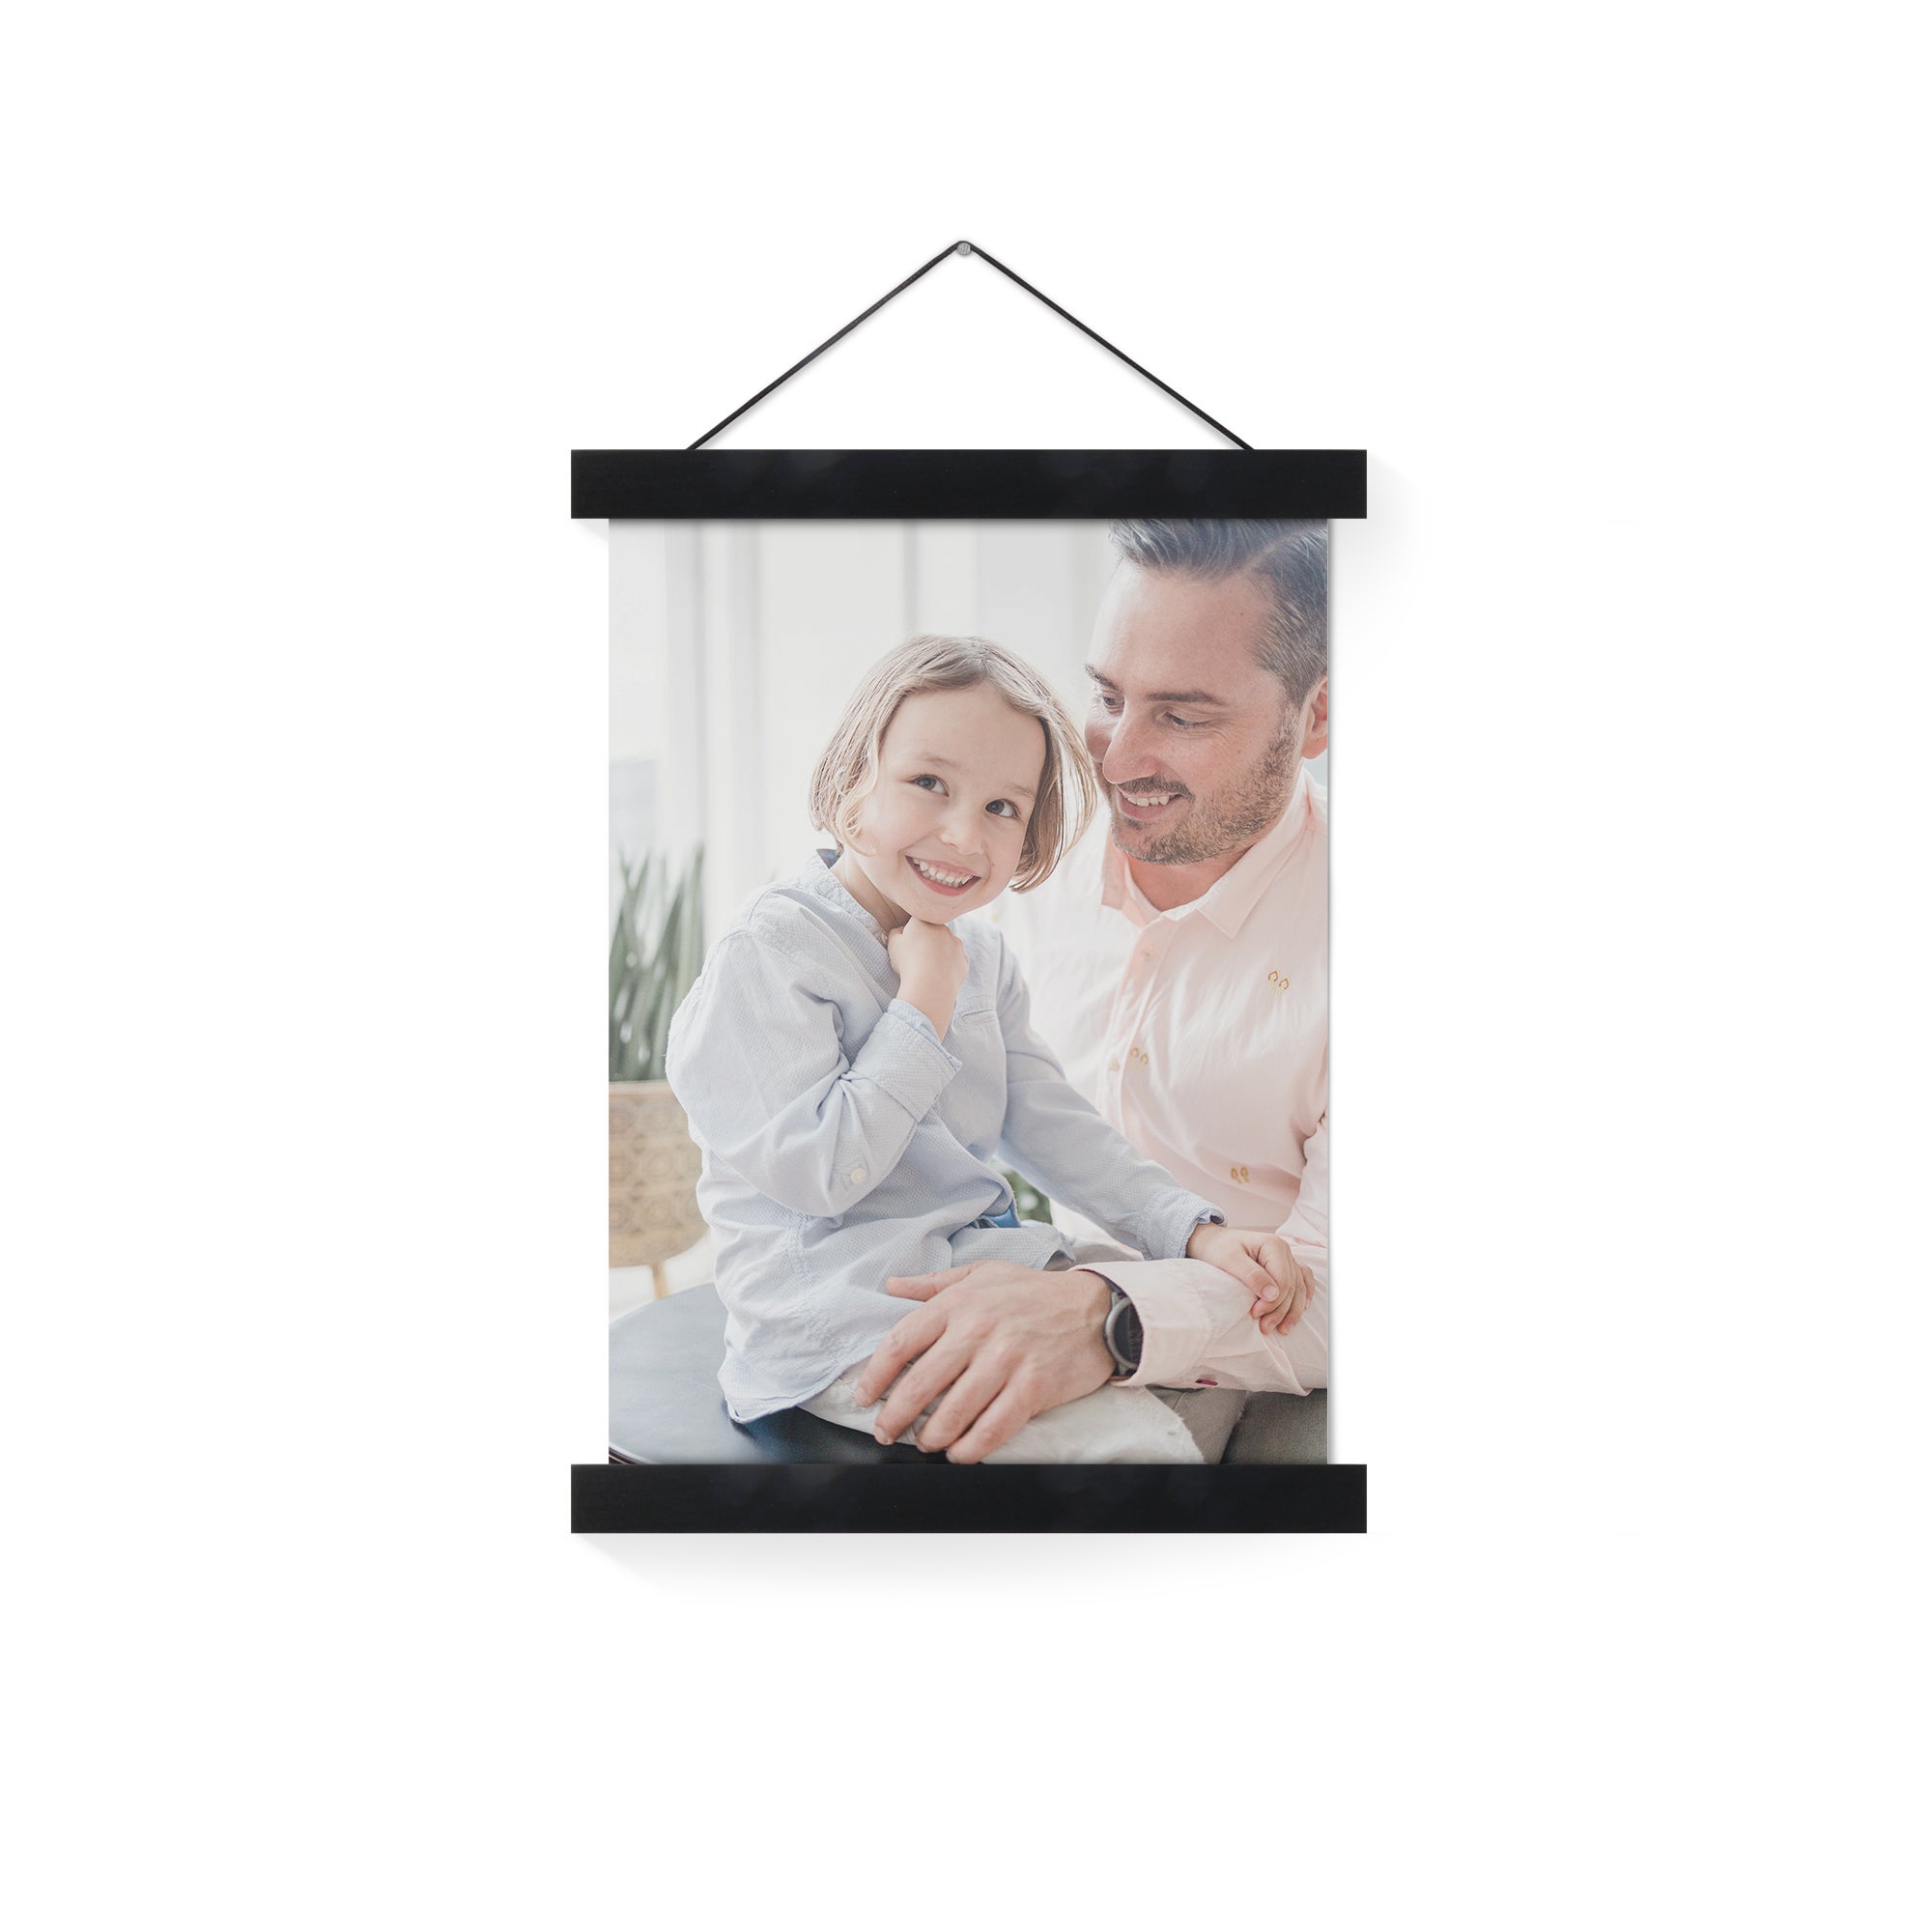 Personalised poster with black hanger - 20x30